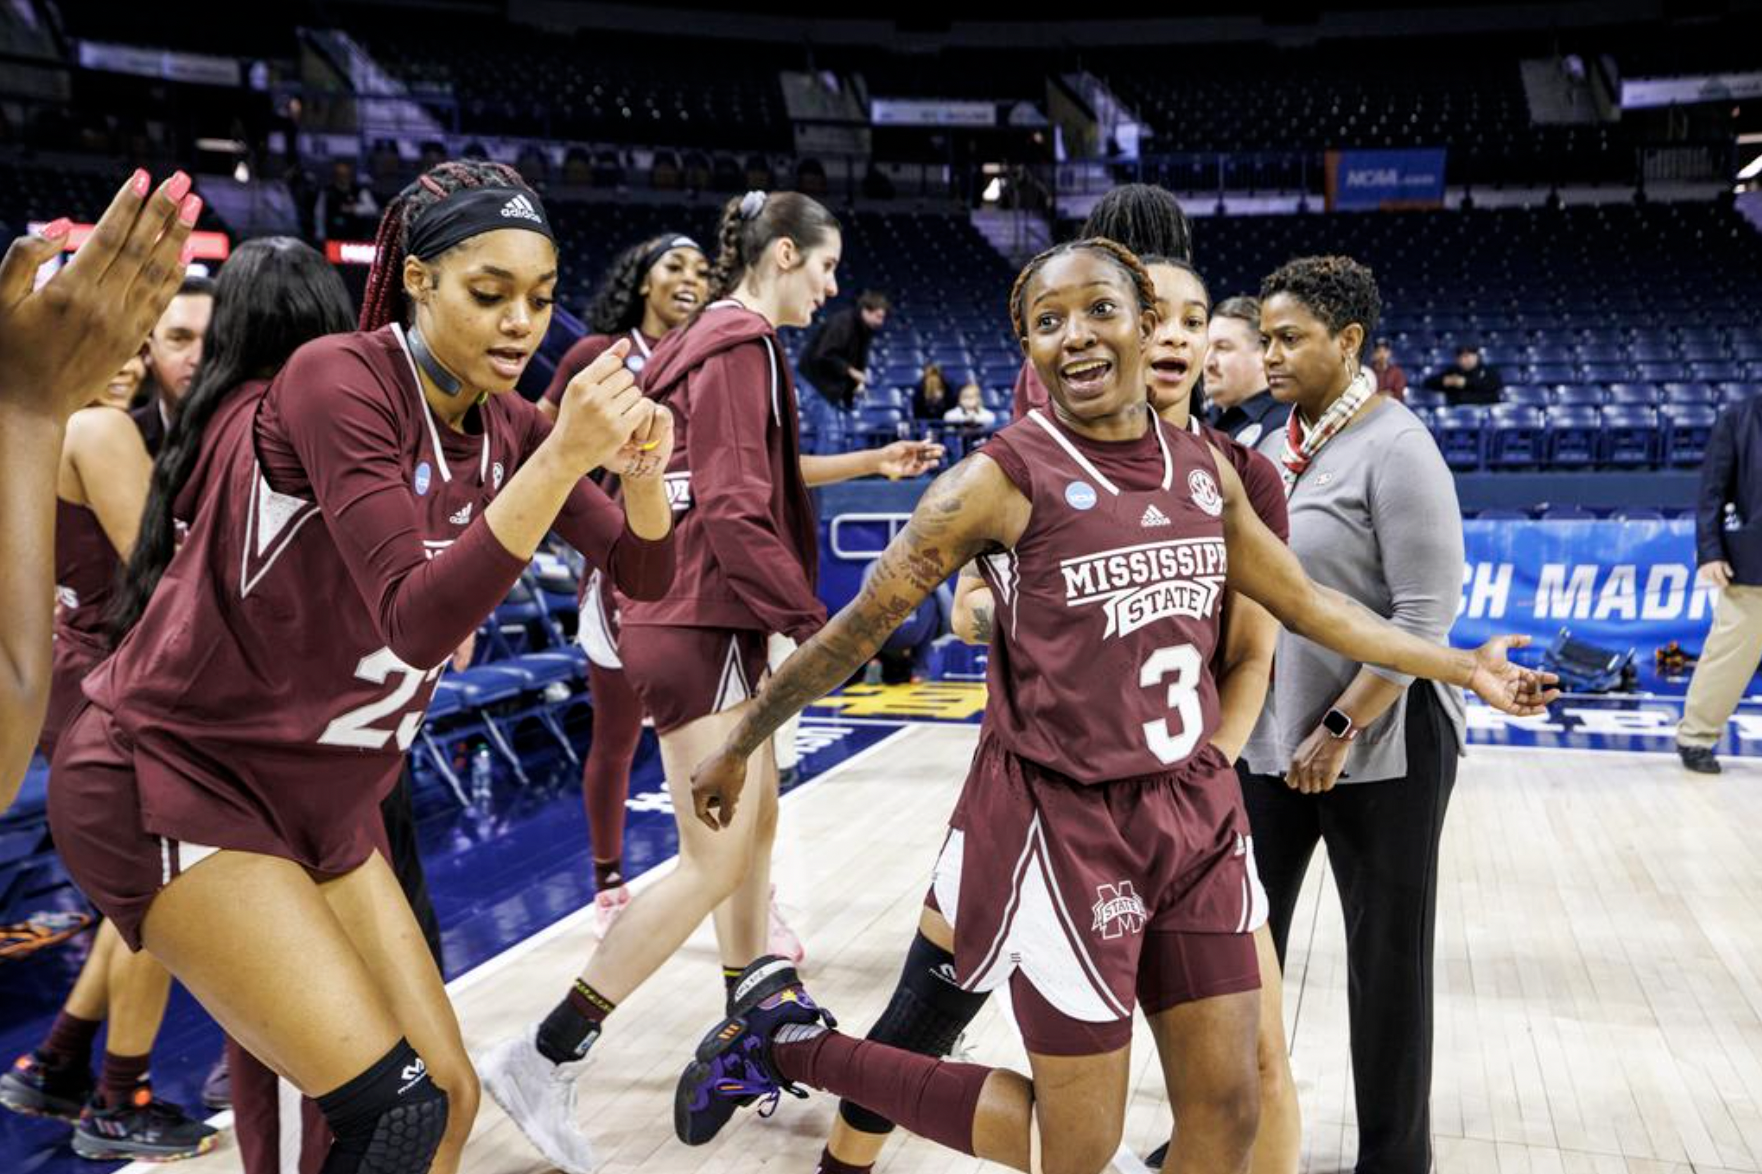 Mississippi State women's basketball team celebrates after beating the Illinois Fighting Illini during the NCAA Women's basketball tournament. Photo: Kevin Snyder/Mississippi State athletics.